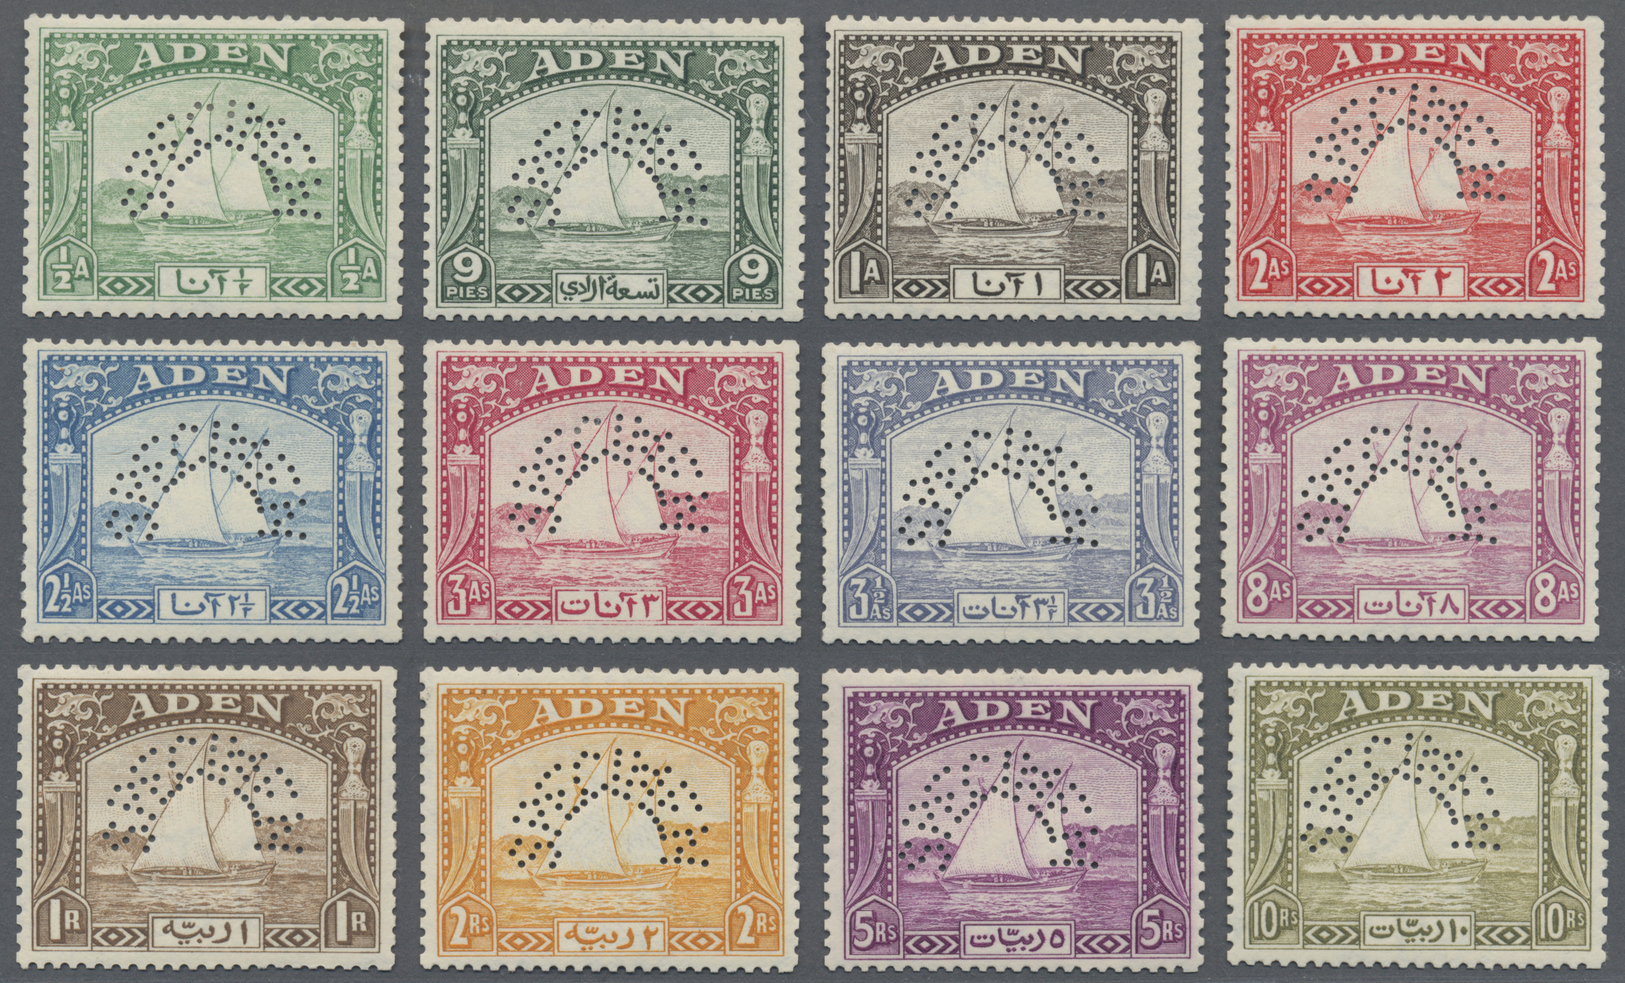 Aden: 1937 Dhows Complete Set Perforated SPECIMEN, Mint Lightly Hinged, Fresh And Very Fine. (SG £800) - Yemen